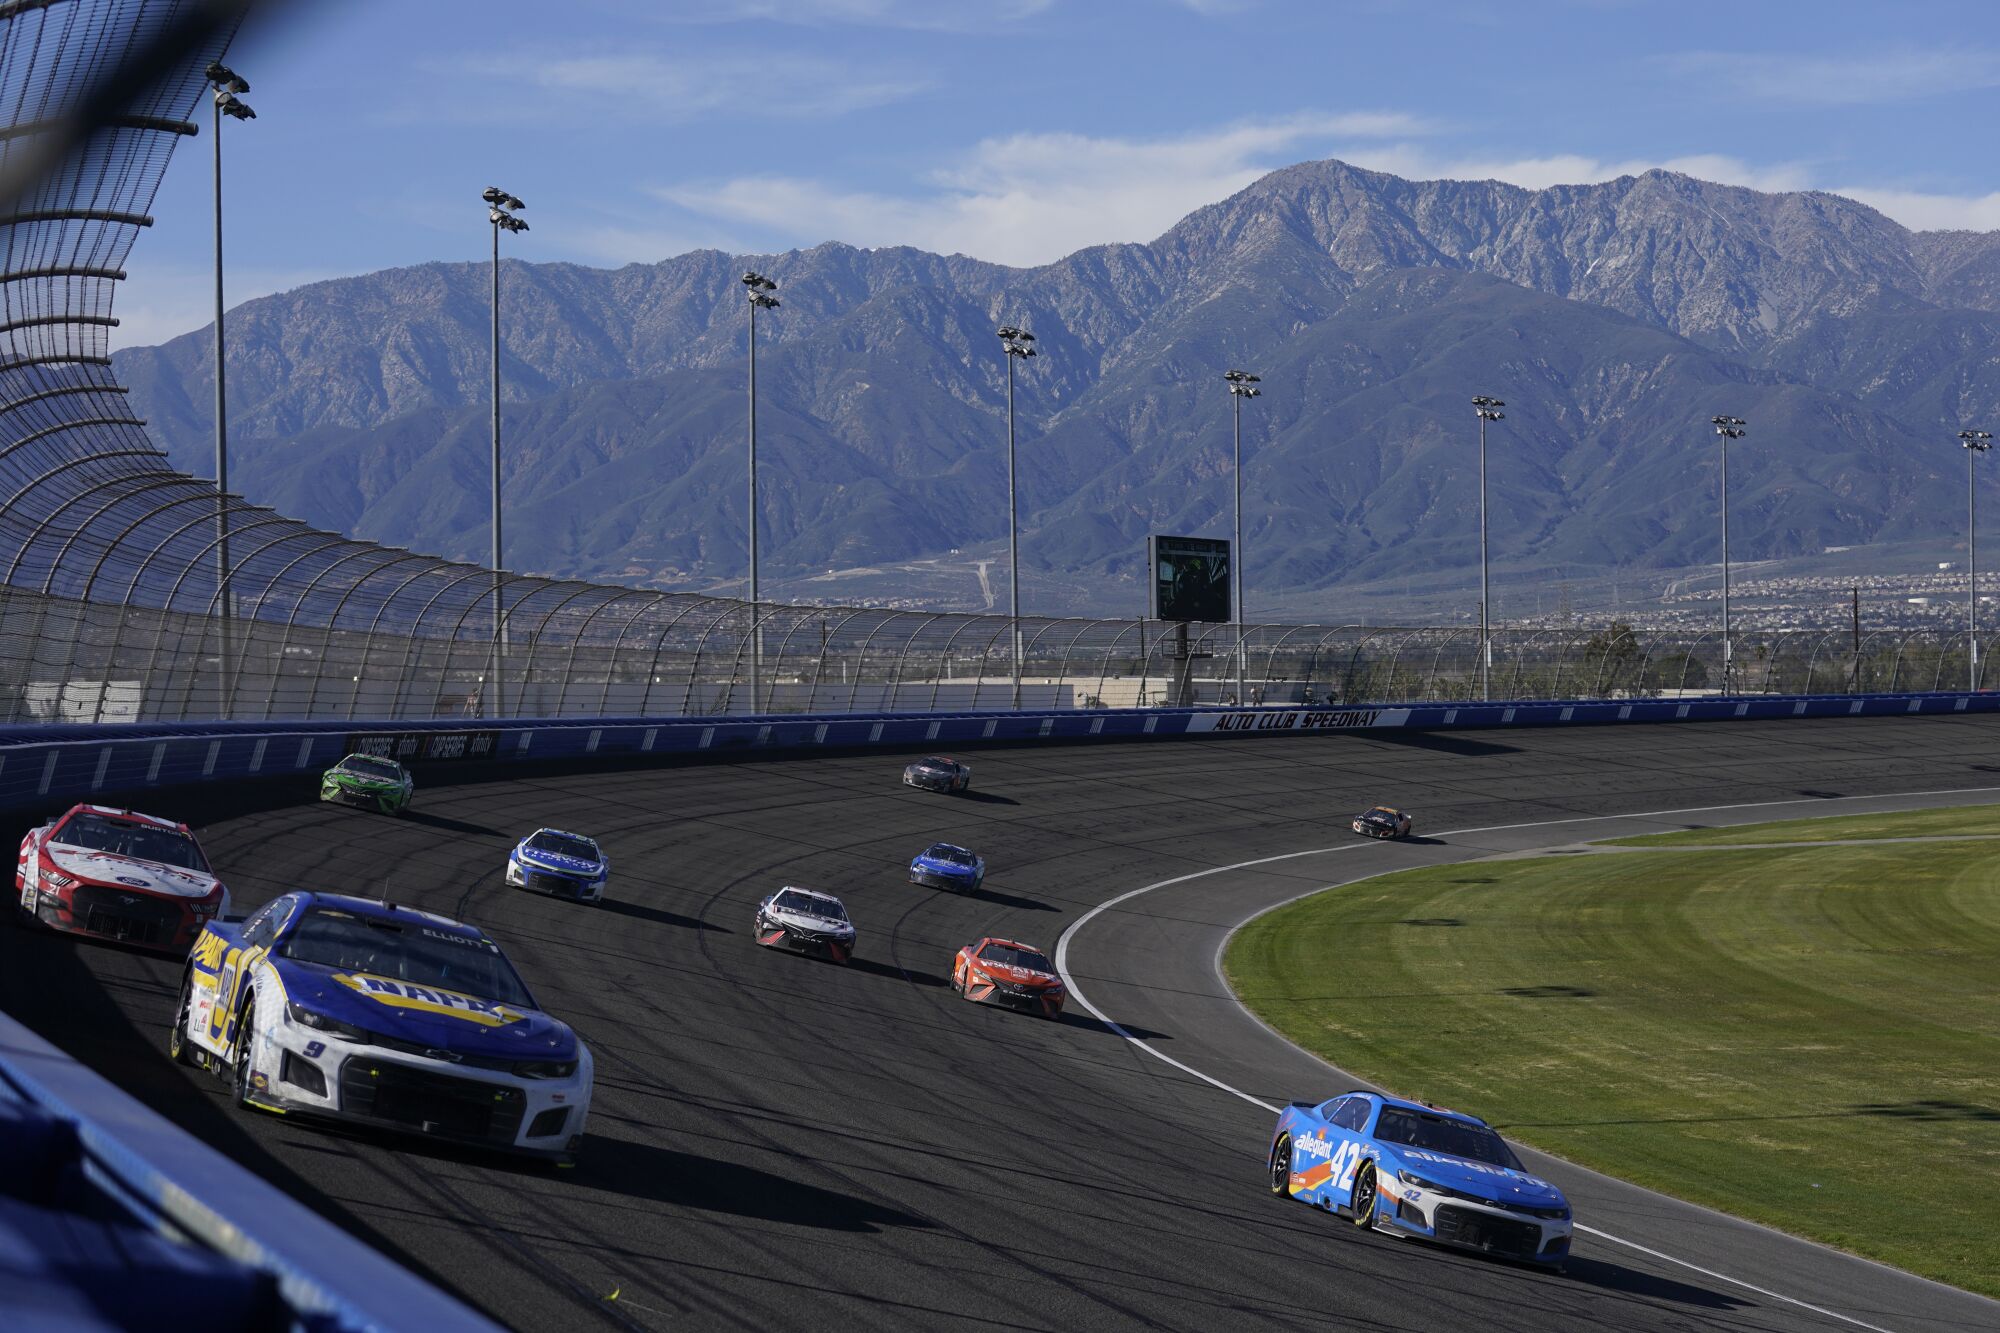 Chase Elliott, top left, leads a group during a NASCAR Cup race at Auto Club Speedway in Fontana in February 2022.